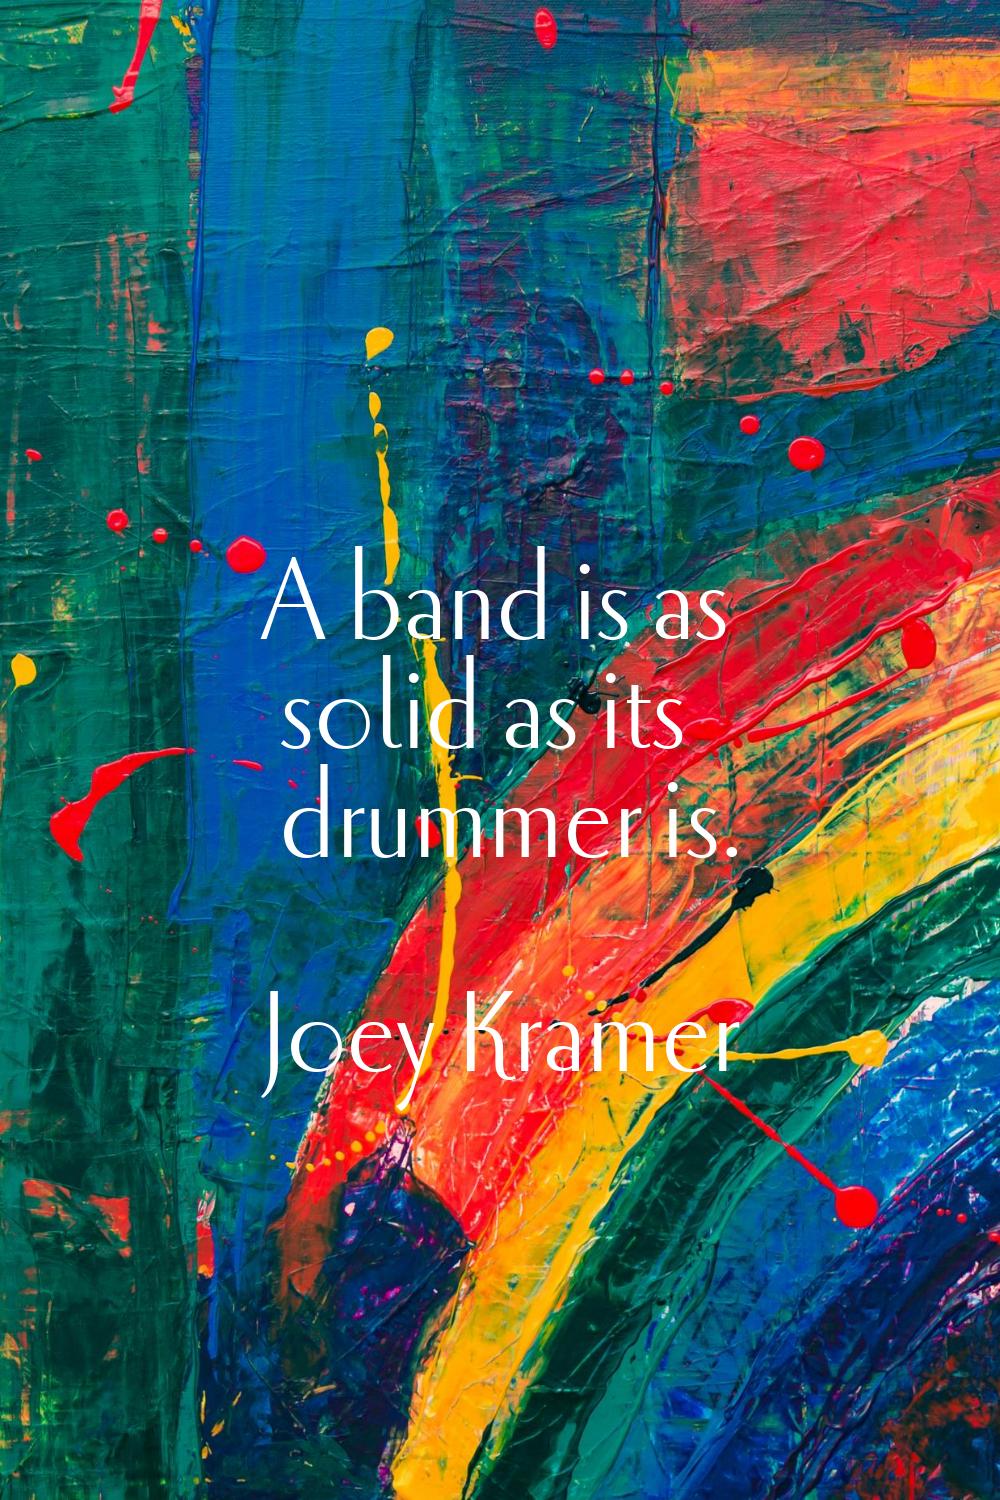 A band is as solid as its drummer is.